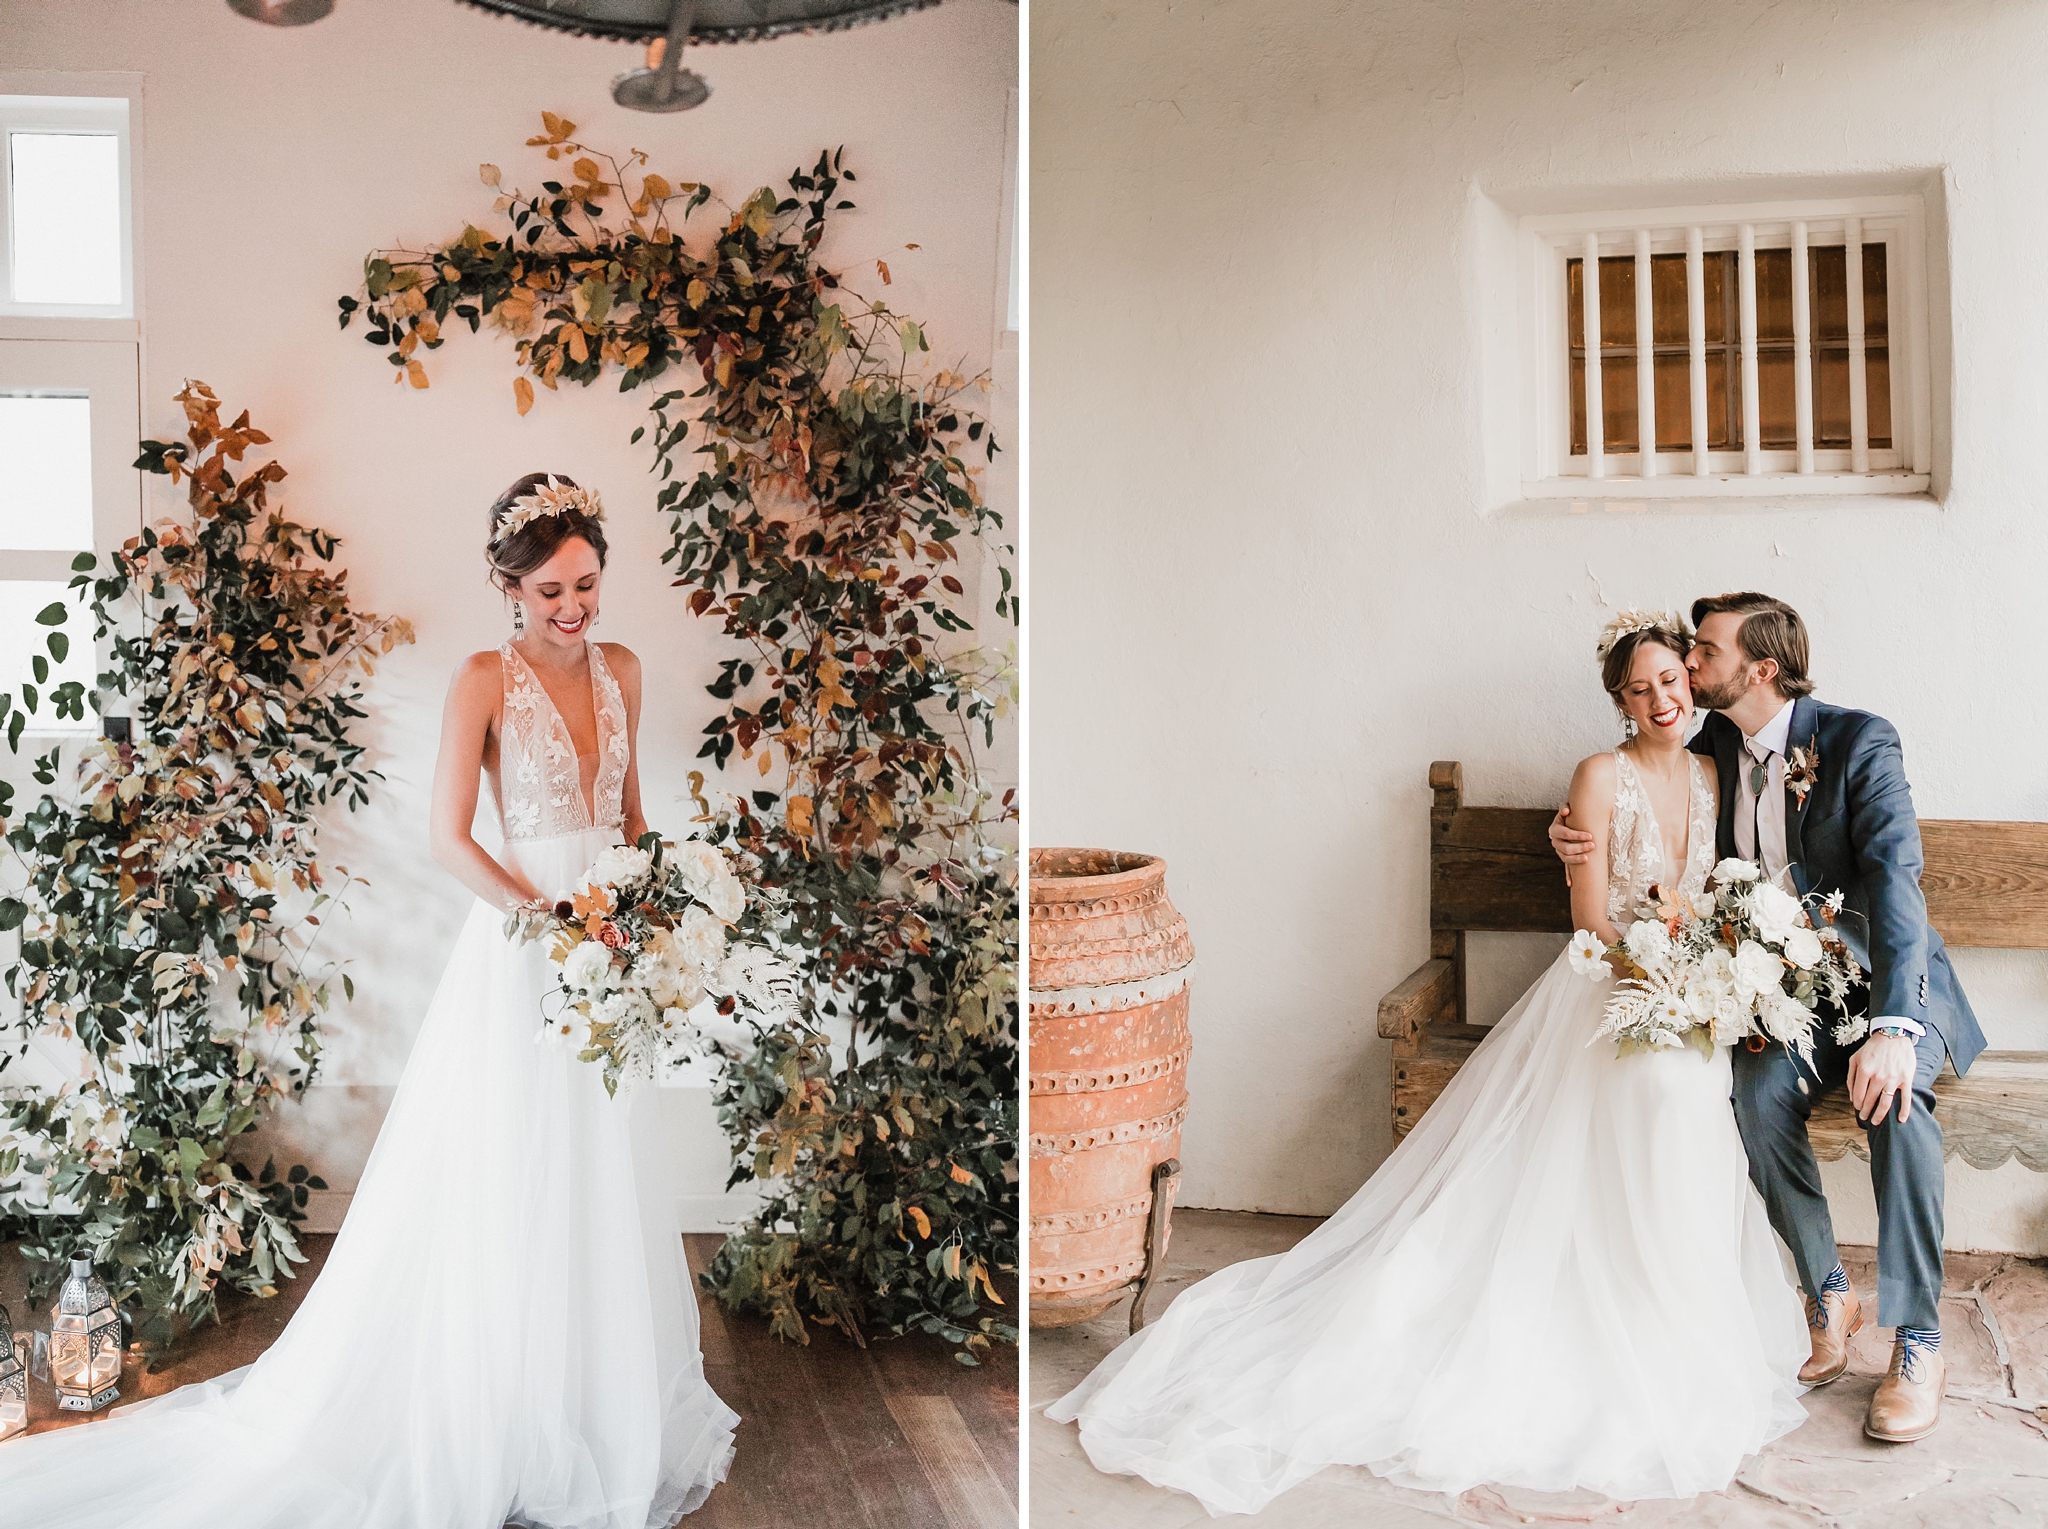 Alicia+lucia+photography+-+albuquerque+wedding+photographer+-+santa+fe+wedding+photography+-+new+mexico+wedding+photographer+-+new+mexico+wedding+-+wedding+gowns+-+bridal+gowns+-+a+line+wedding+gown_0004.jpg